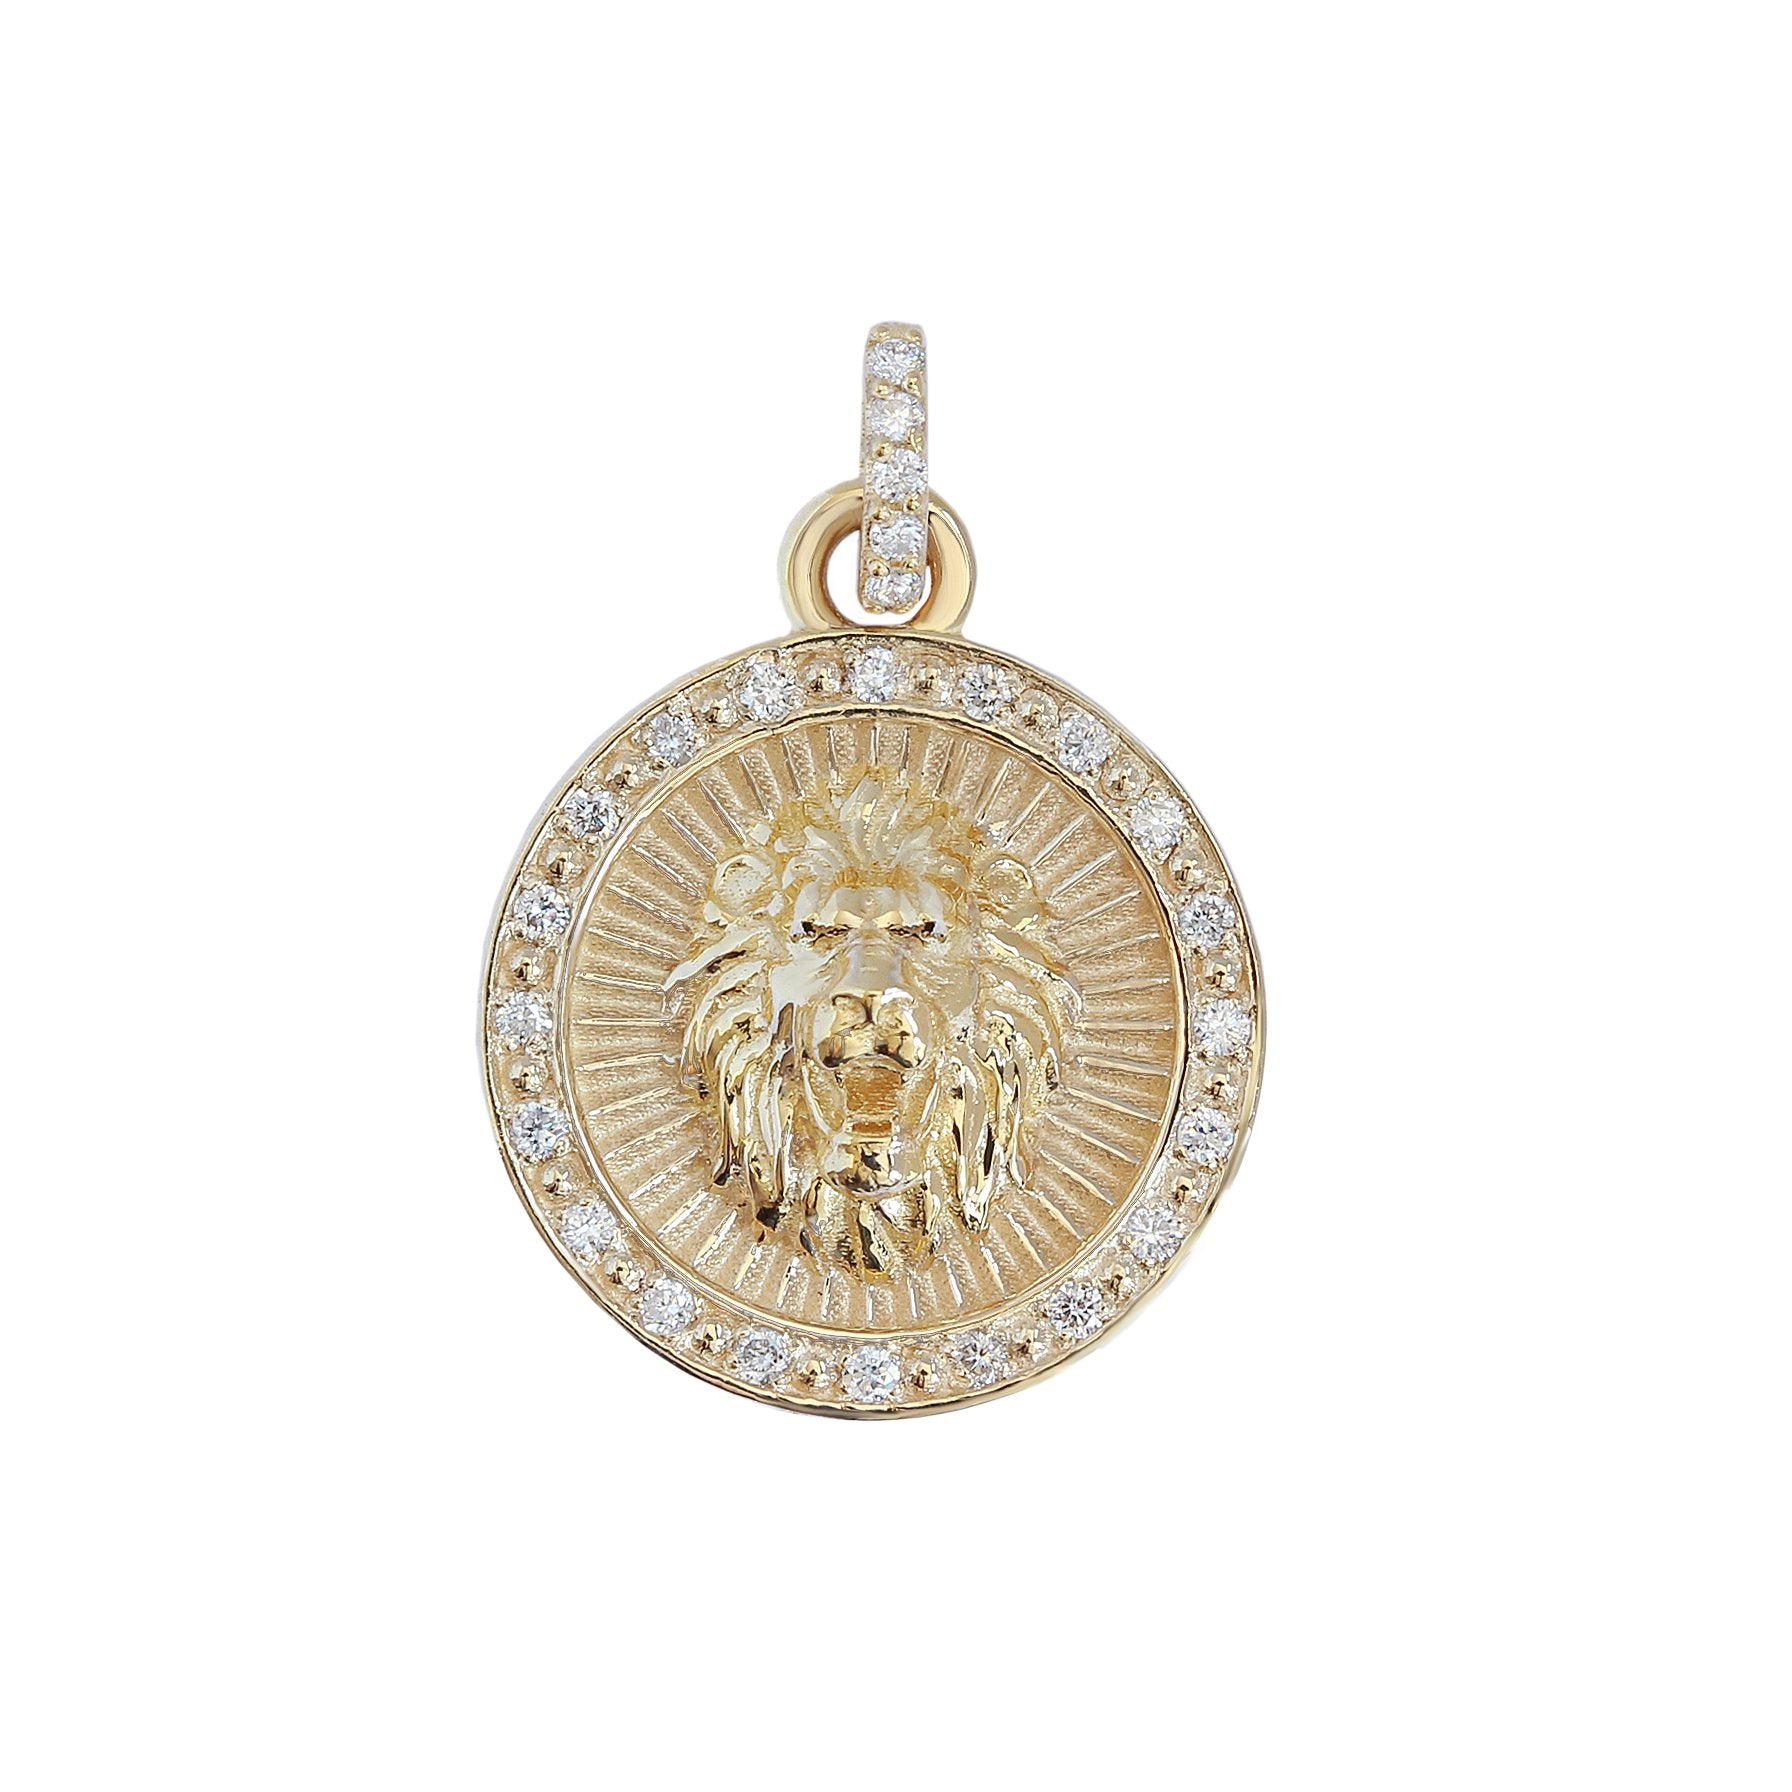 Gold Lion Astrology Symbol Coin Pendant Necklace - 14K Yellow Gold, READY TO SHIP!